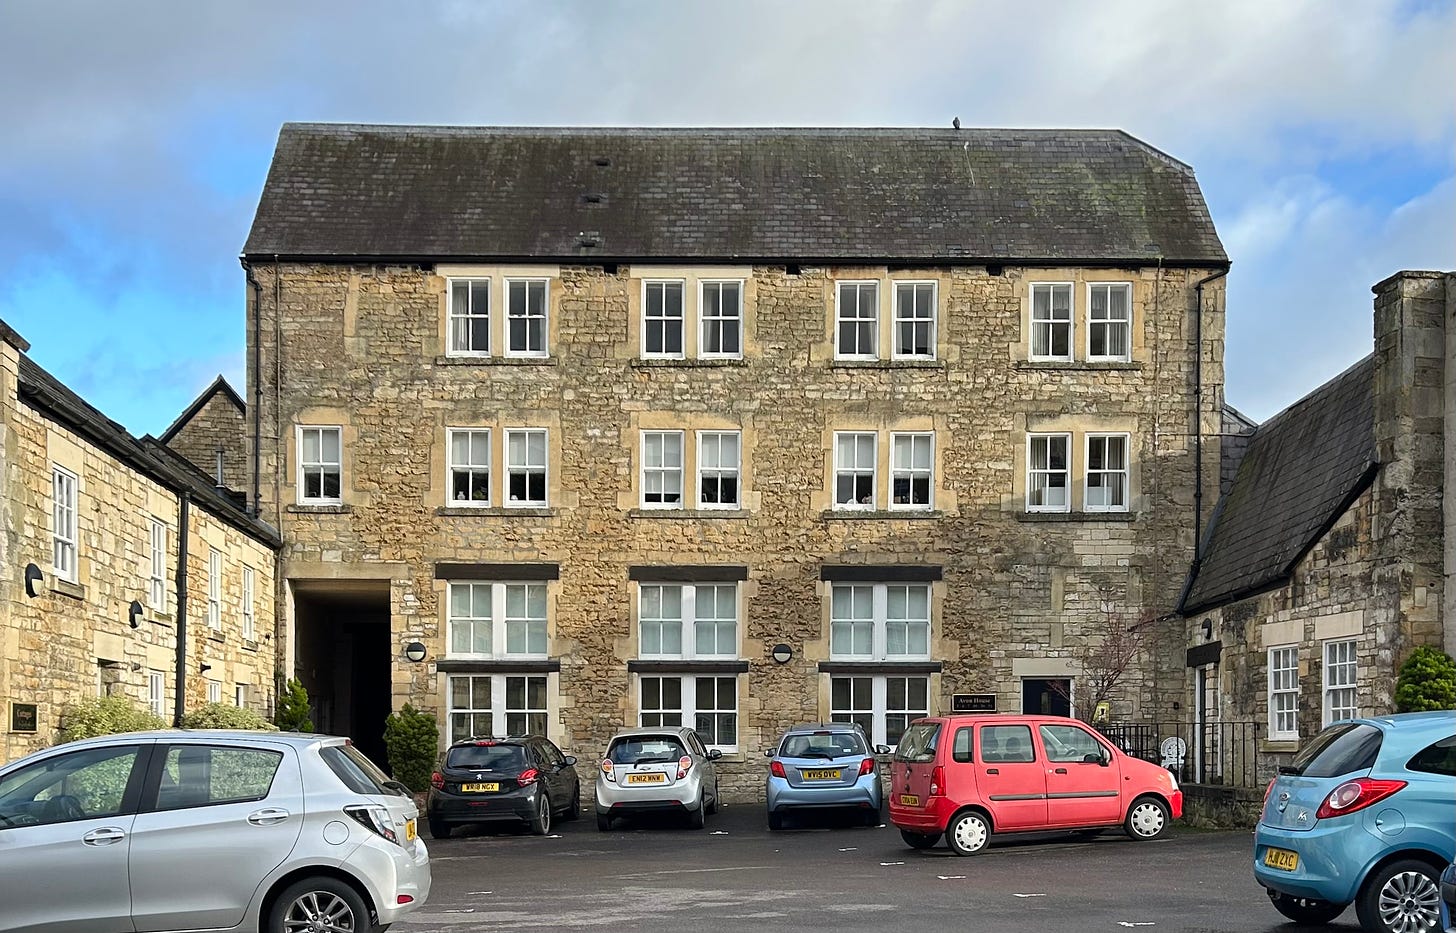 Church Street Mill, now part of the accomation for older persons with Abbey Mill Church Street, Bradford on Avon. Image: Roland's Travels